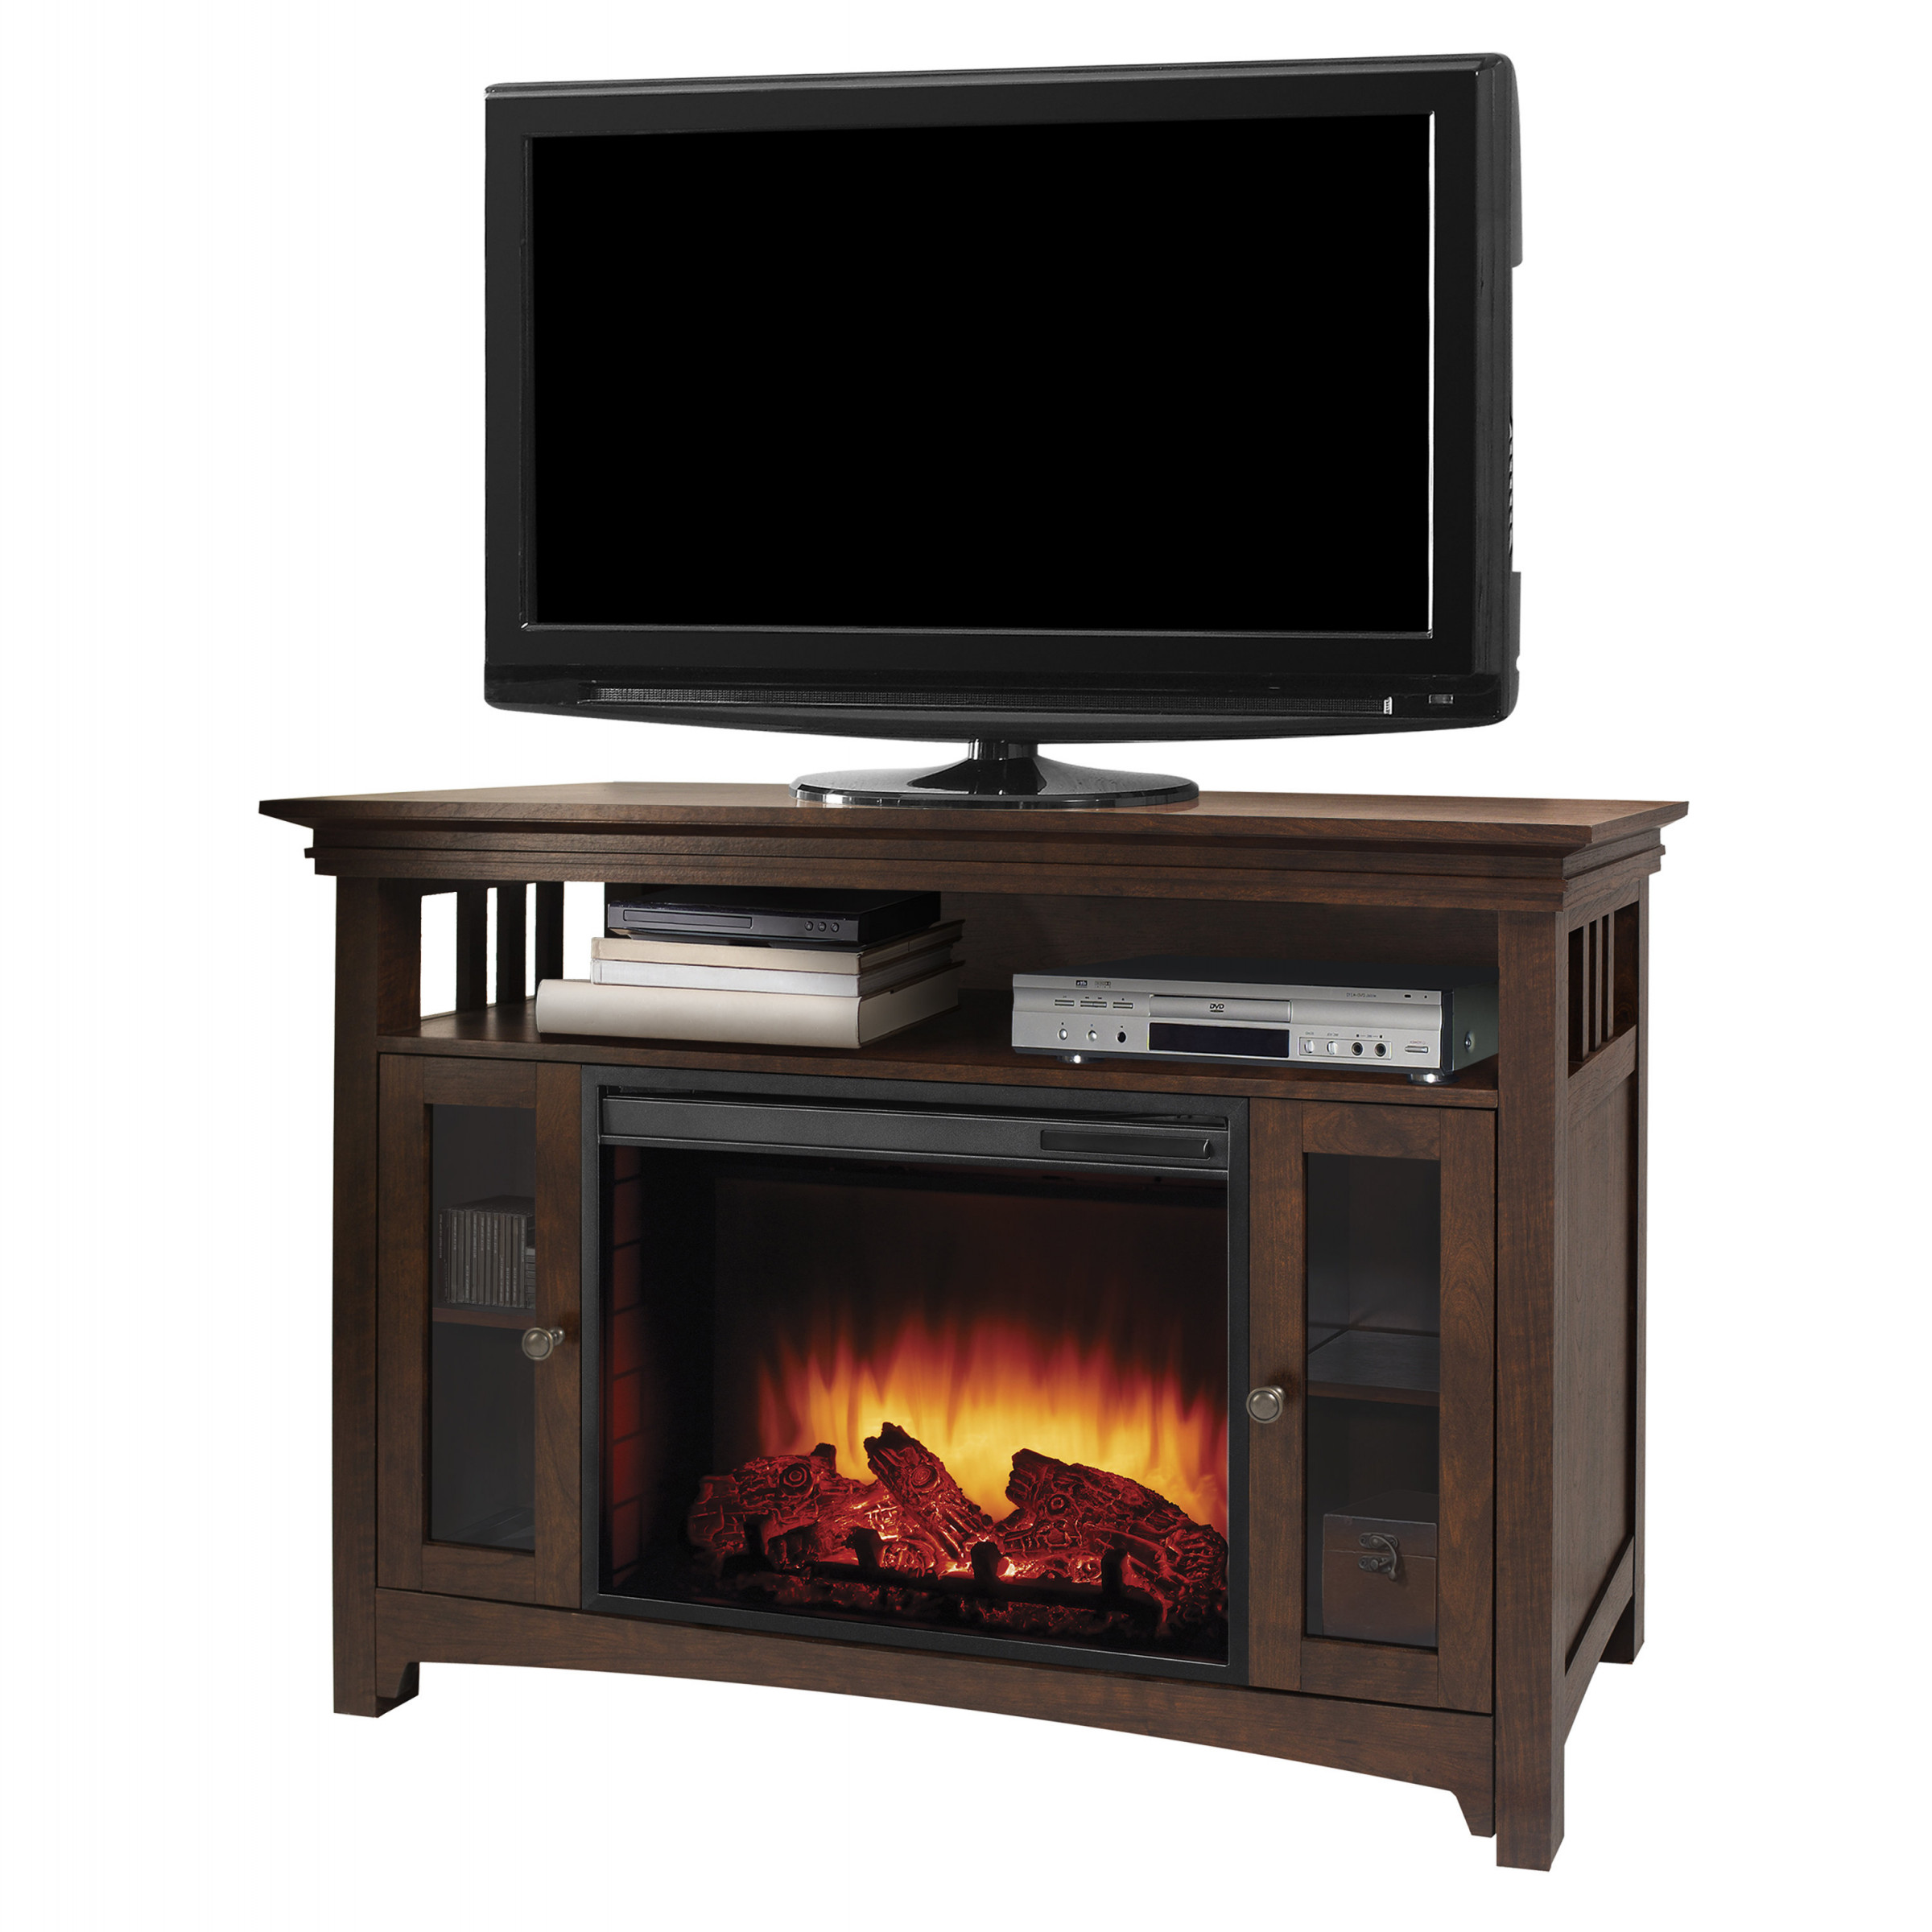 Cheap Fake Fireplace Lovely 35 Minimaliste Electric Fireplace Tv Stand